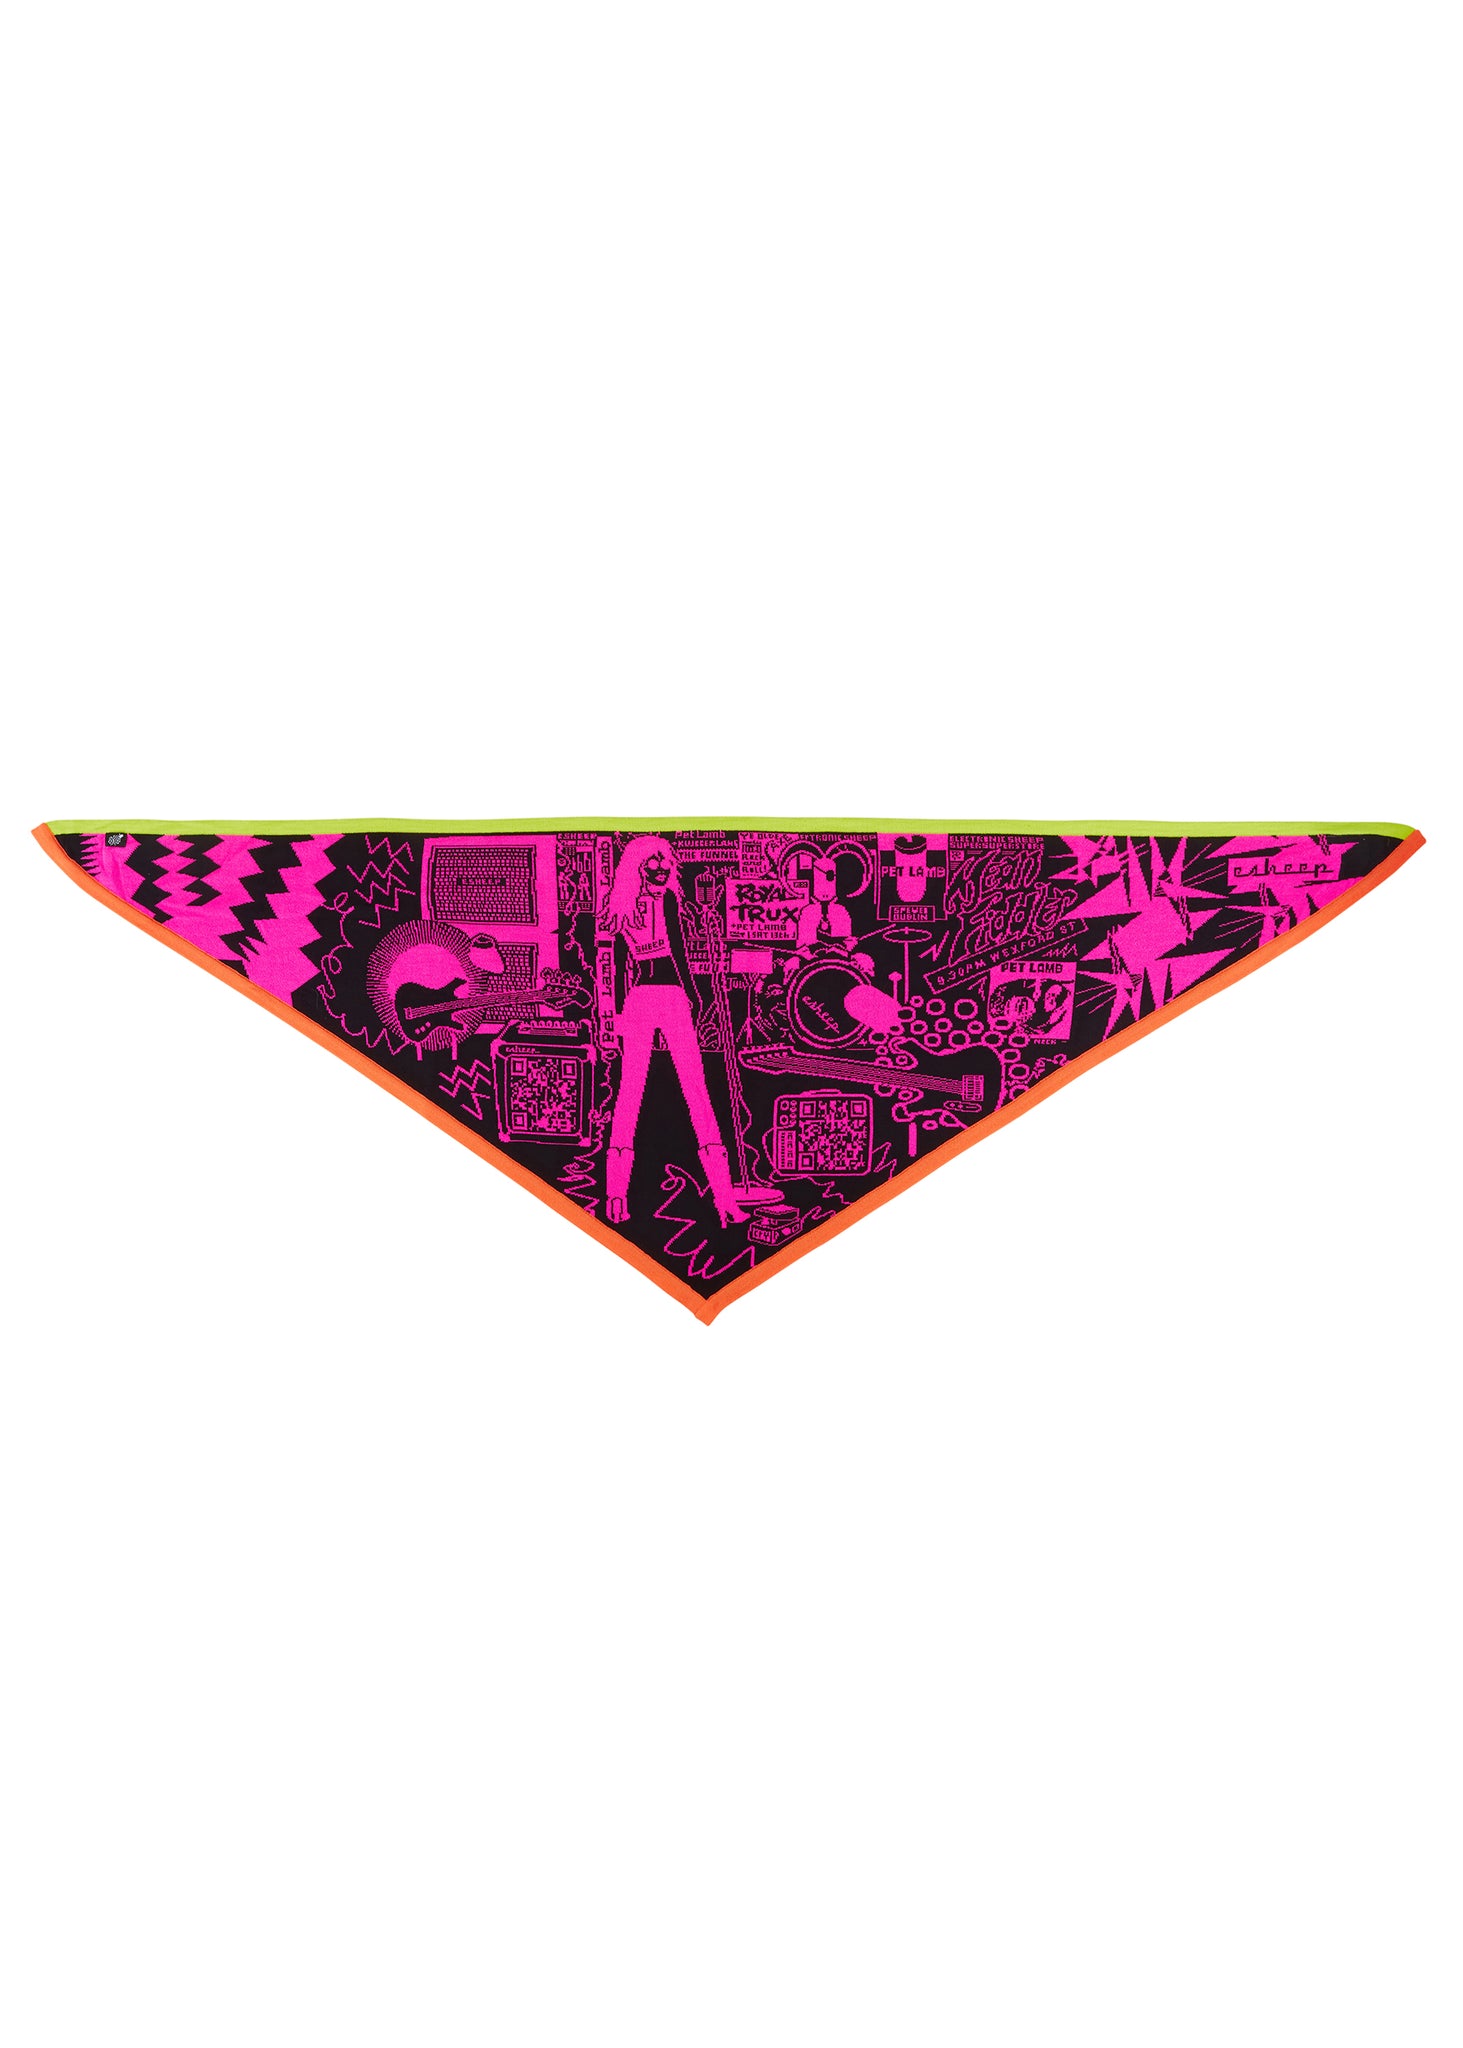 'THE MEAN FIDDLER – 9.30PM, WEXFORD ST' TRIANGLE SCARF'